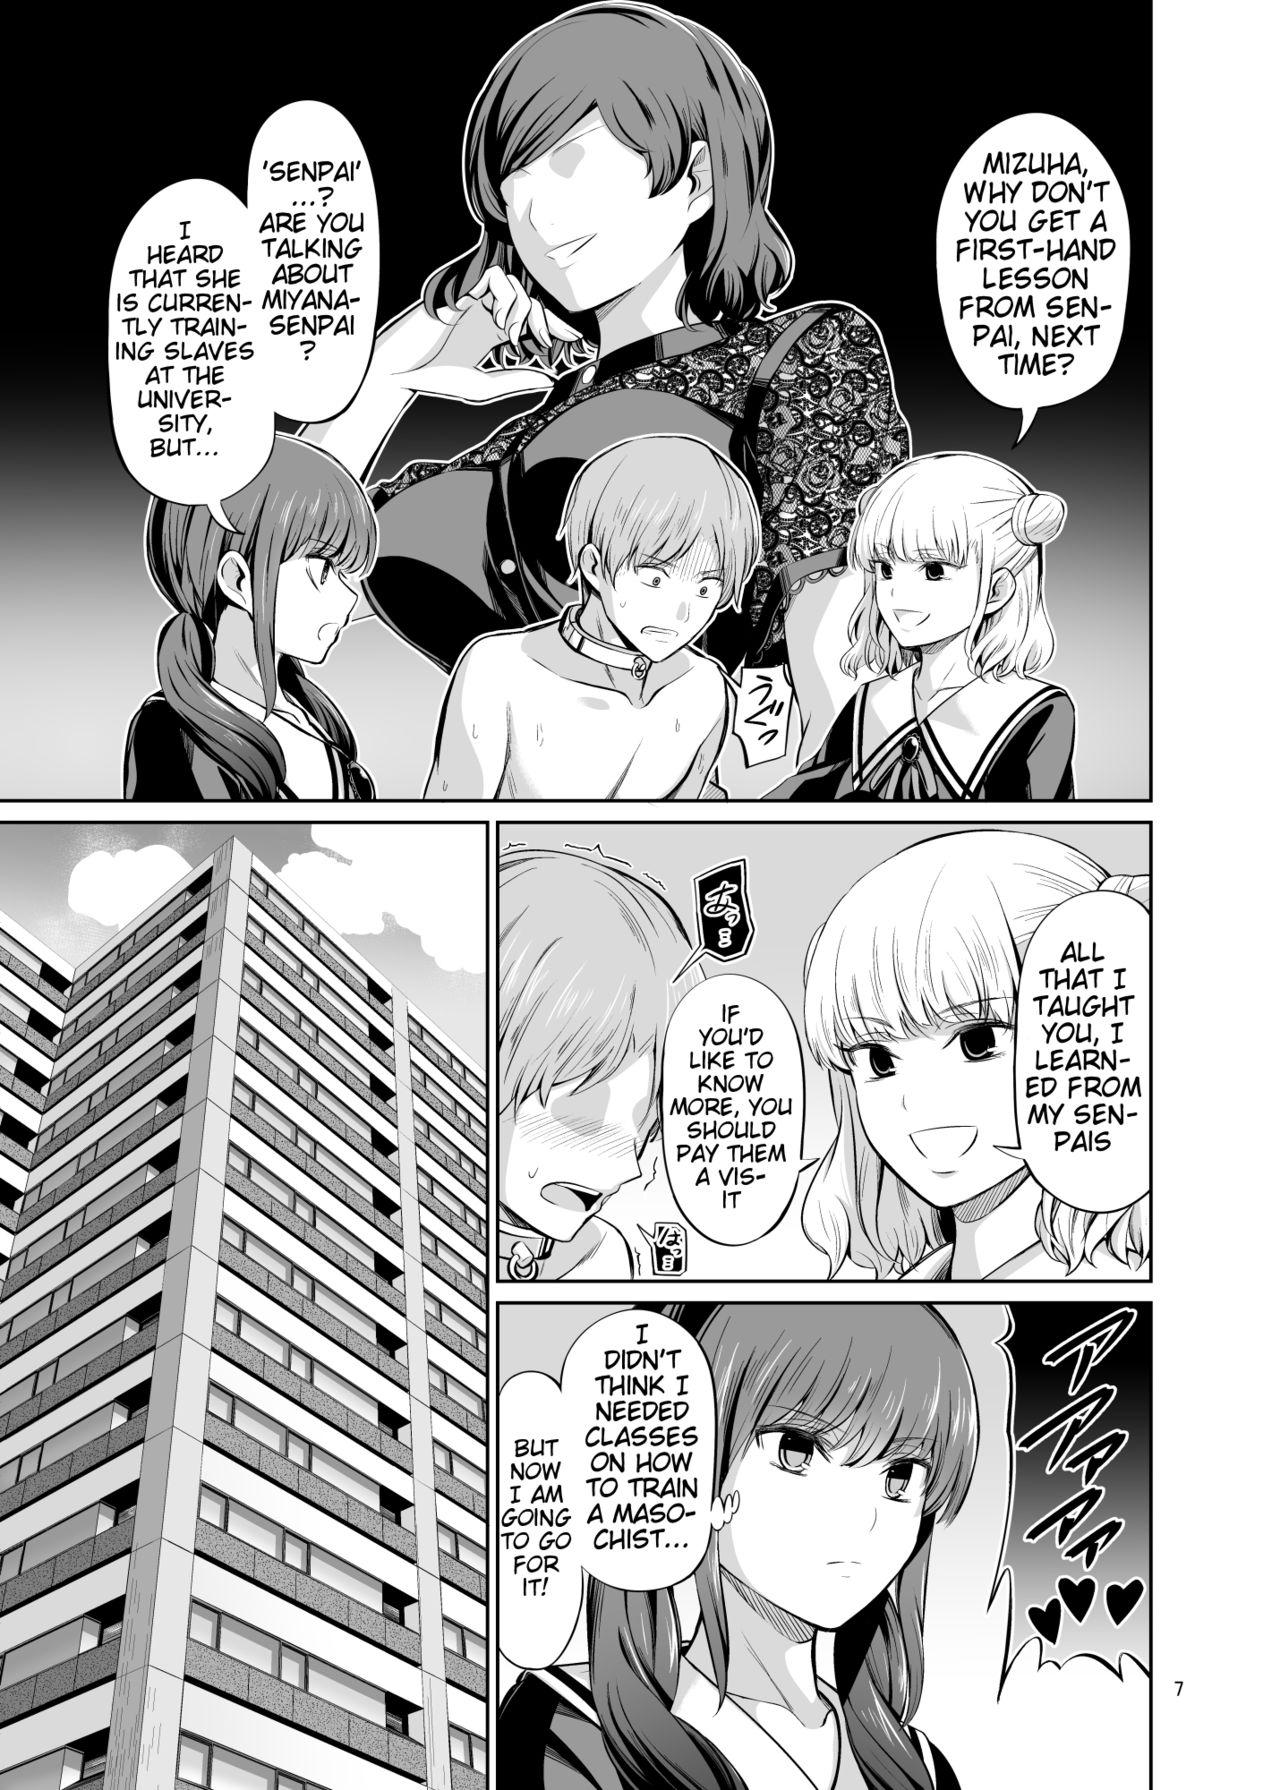 Pink Tensoushugi no Kuni Kouhen | A Country Based on Point System, Second Part - Original Culo Grande - Page 9